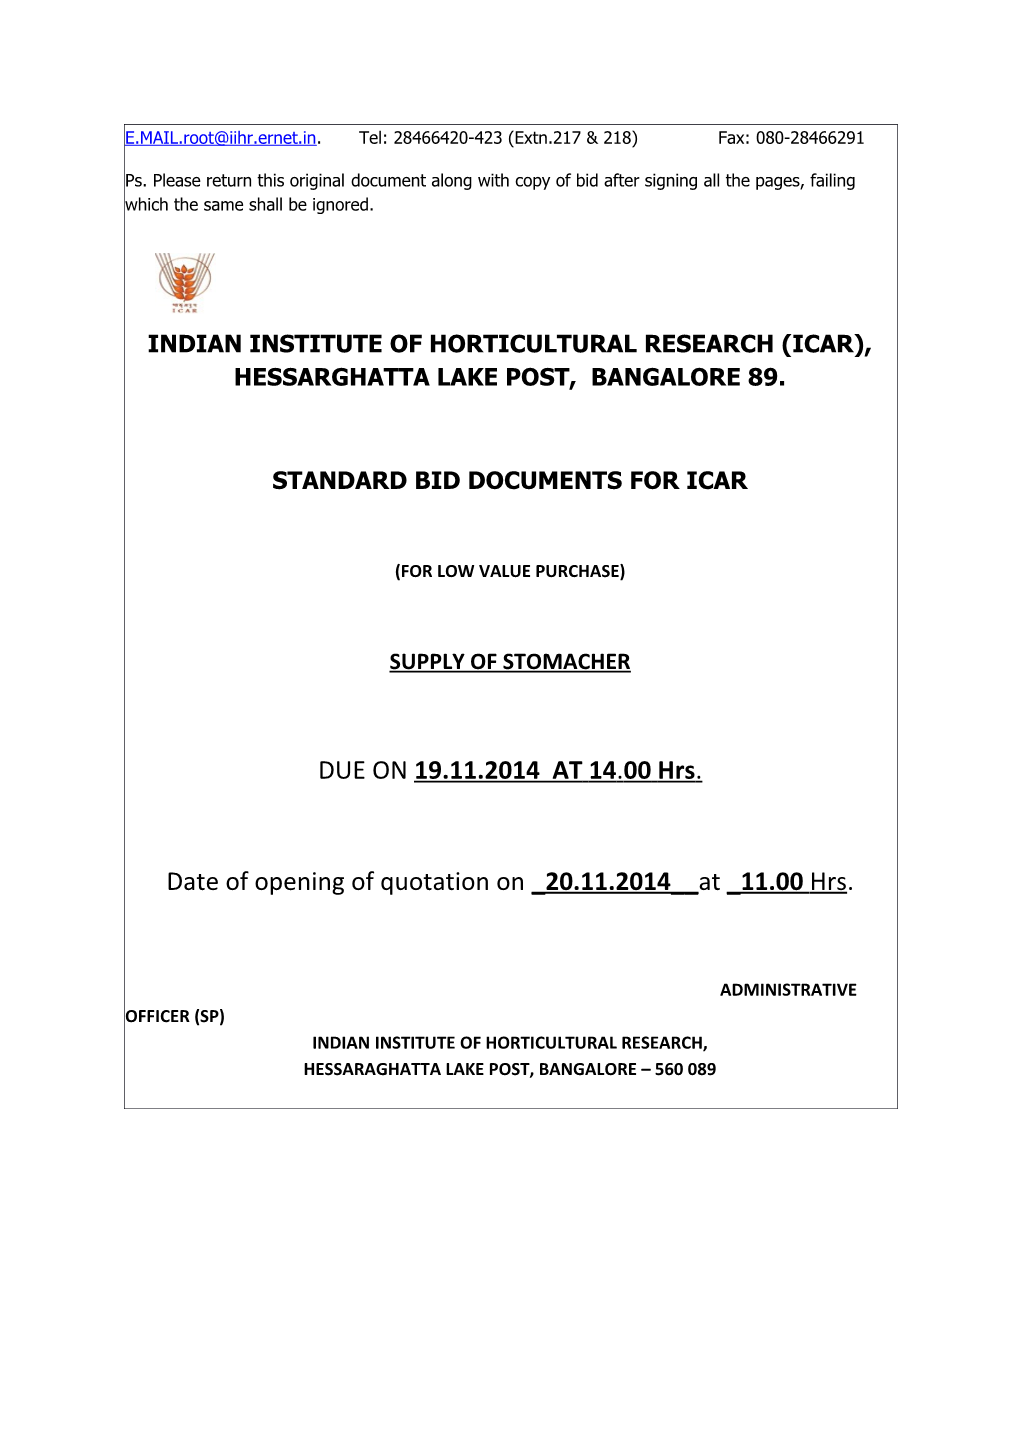 Indian Institute of Horticultural Research (Icar), Hessarghatta Lake Post, Bangalore 89